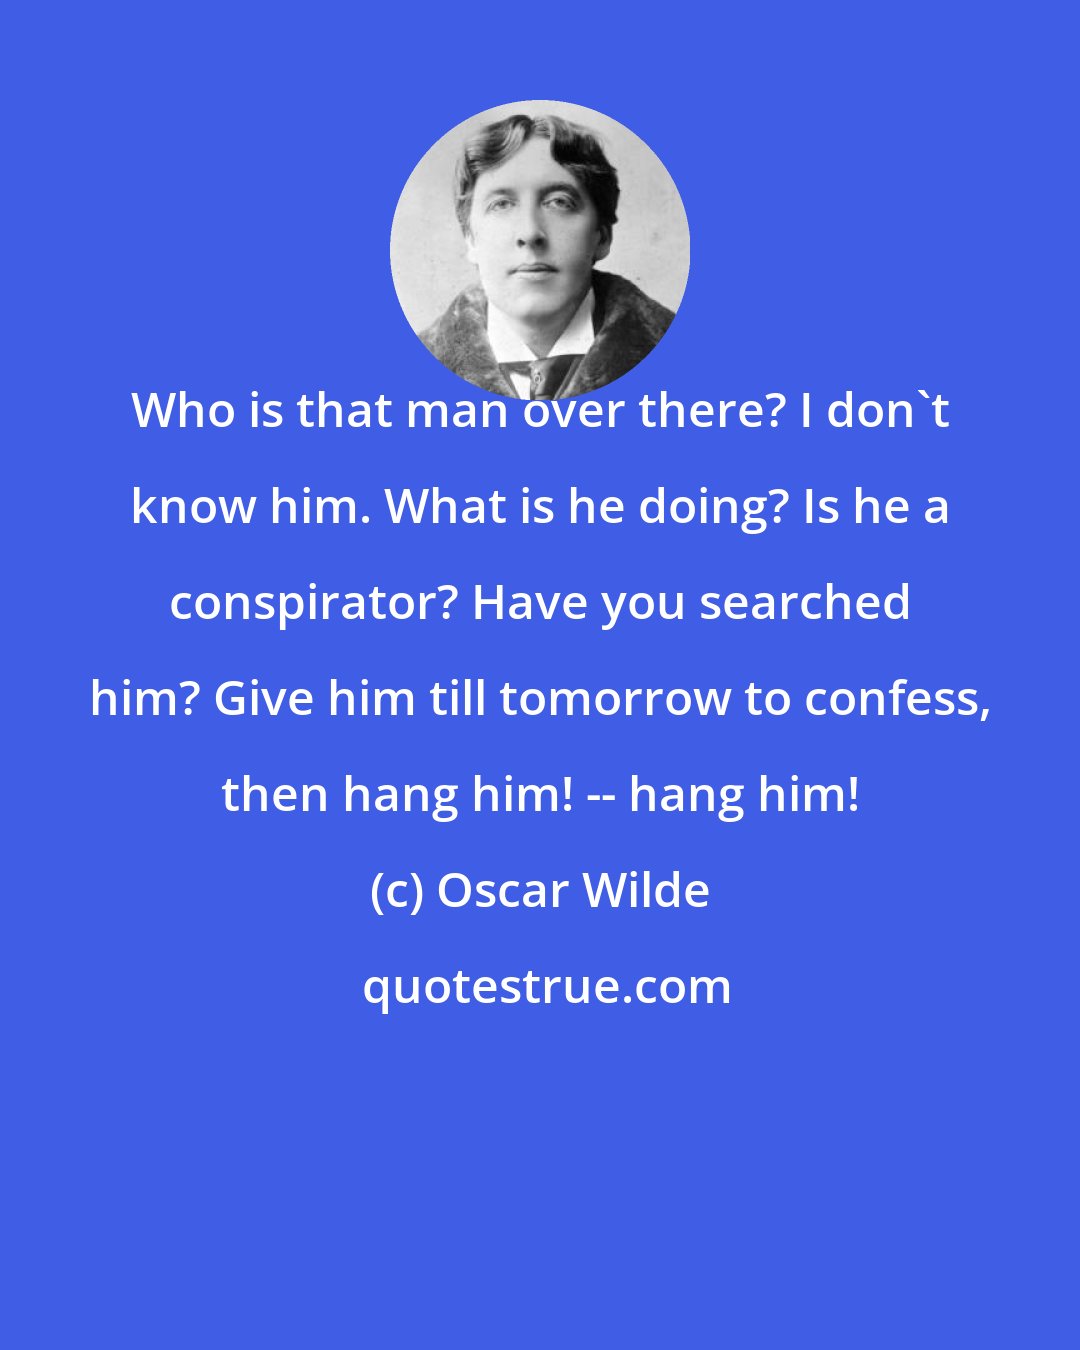 Oscar Wilde: Who is that man over there? I don't know him. What is he doing? Is he a conspirator? Have you searched him? Give him till tomorrow to confess, then hang him! -- hang him!